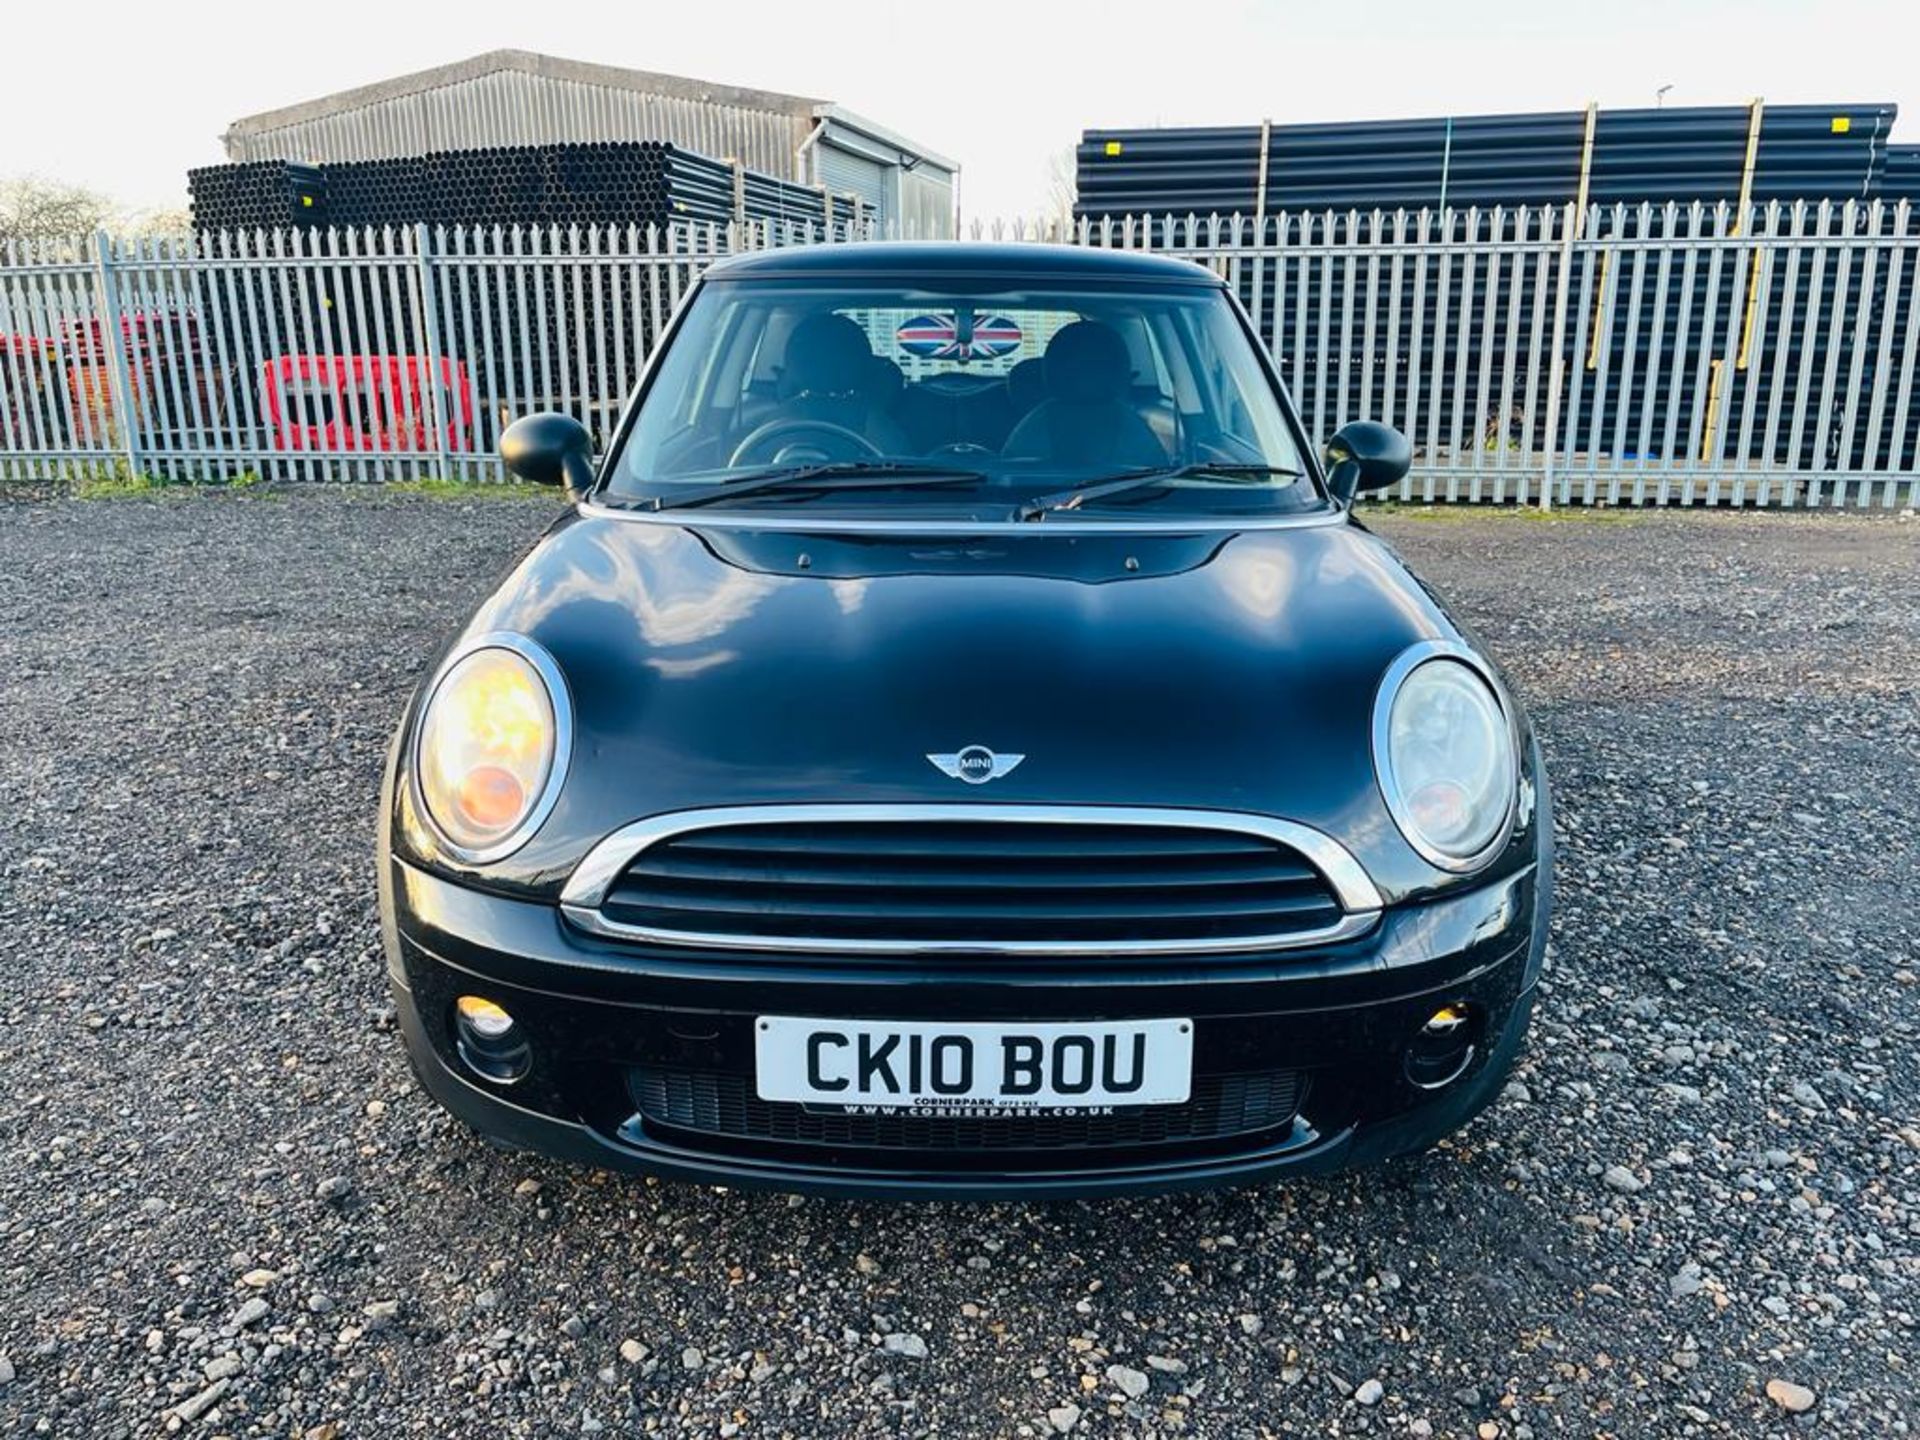 ** ON SALE ** Mini One 1.6 Start/Stop 100 2010 '10 Reg' ' Very Economical' Only 108,430 - No Vat - Image 2 of 26